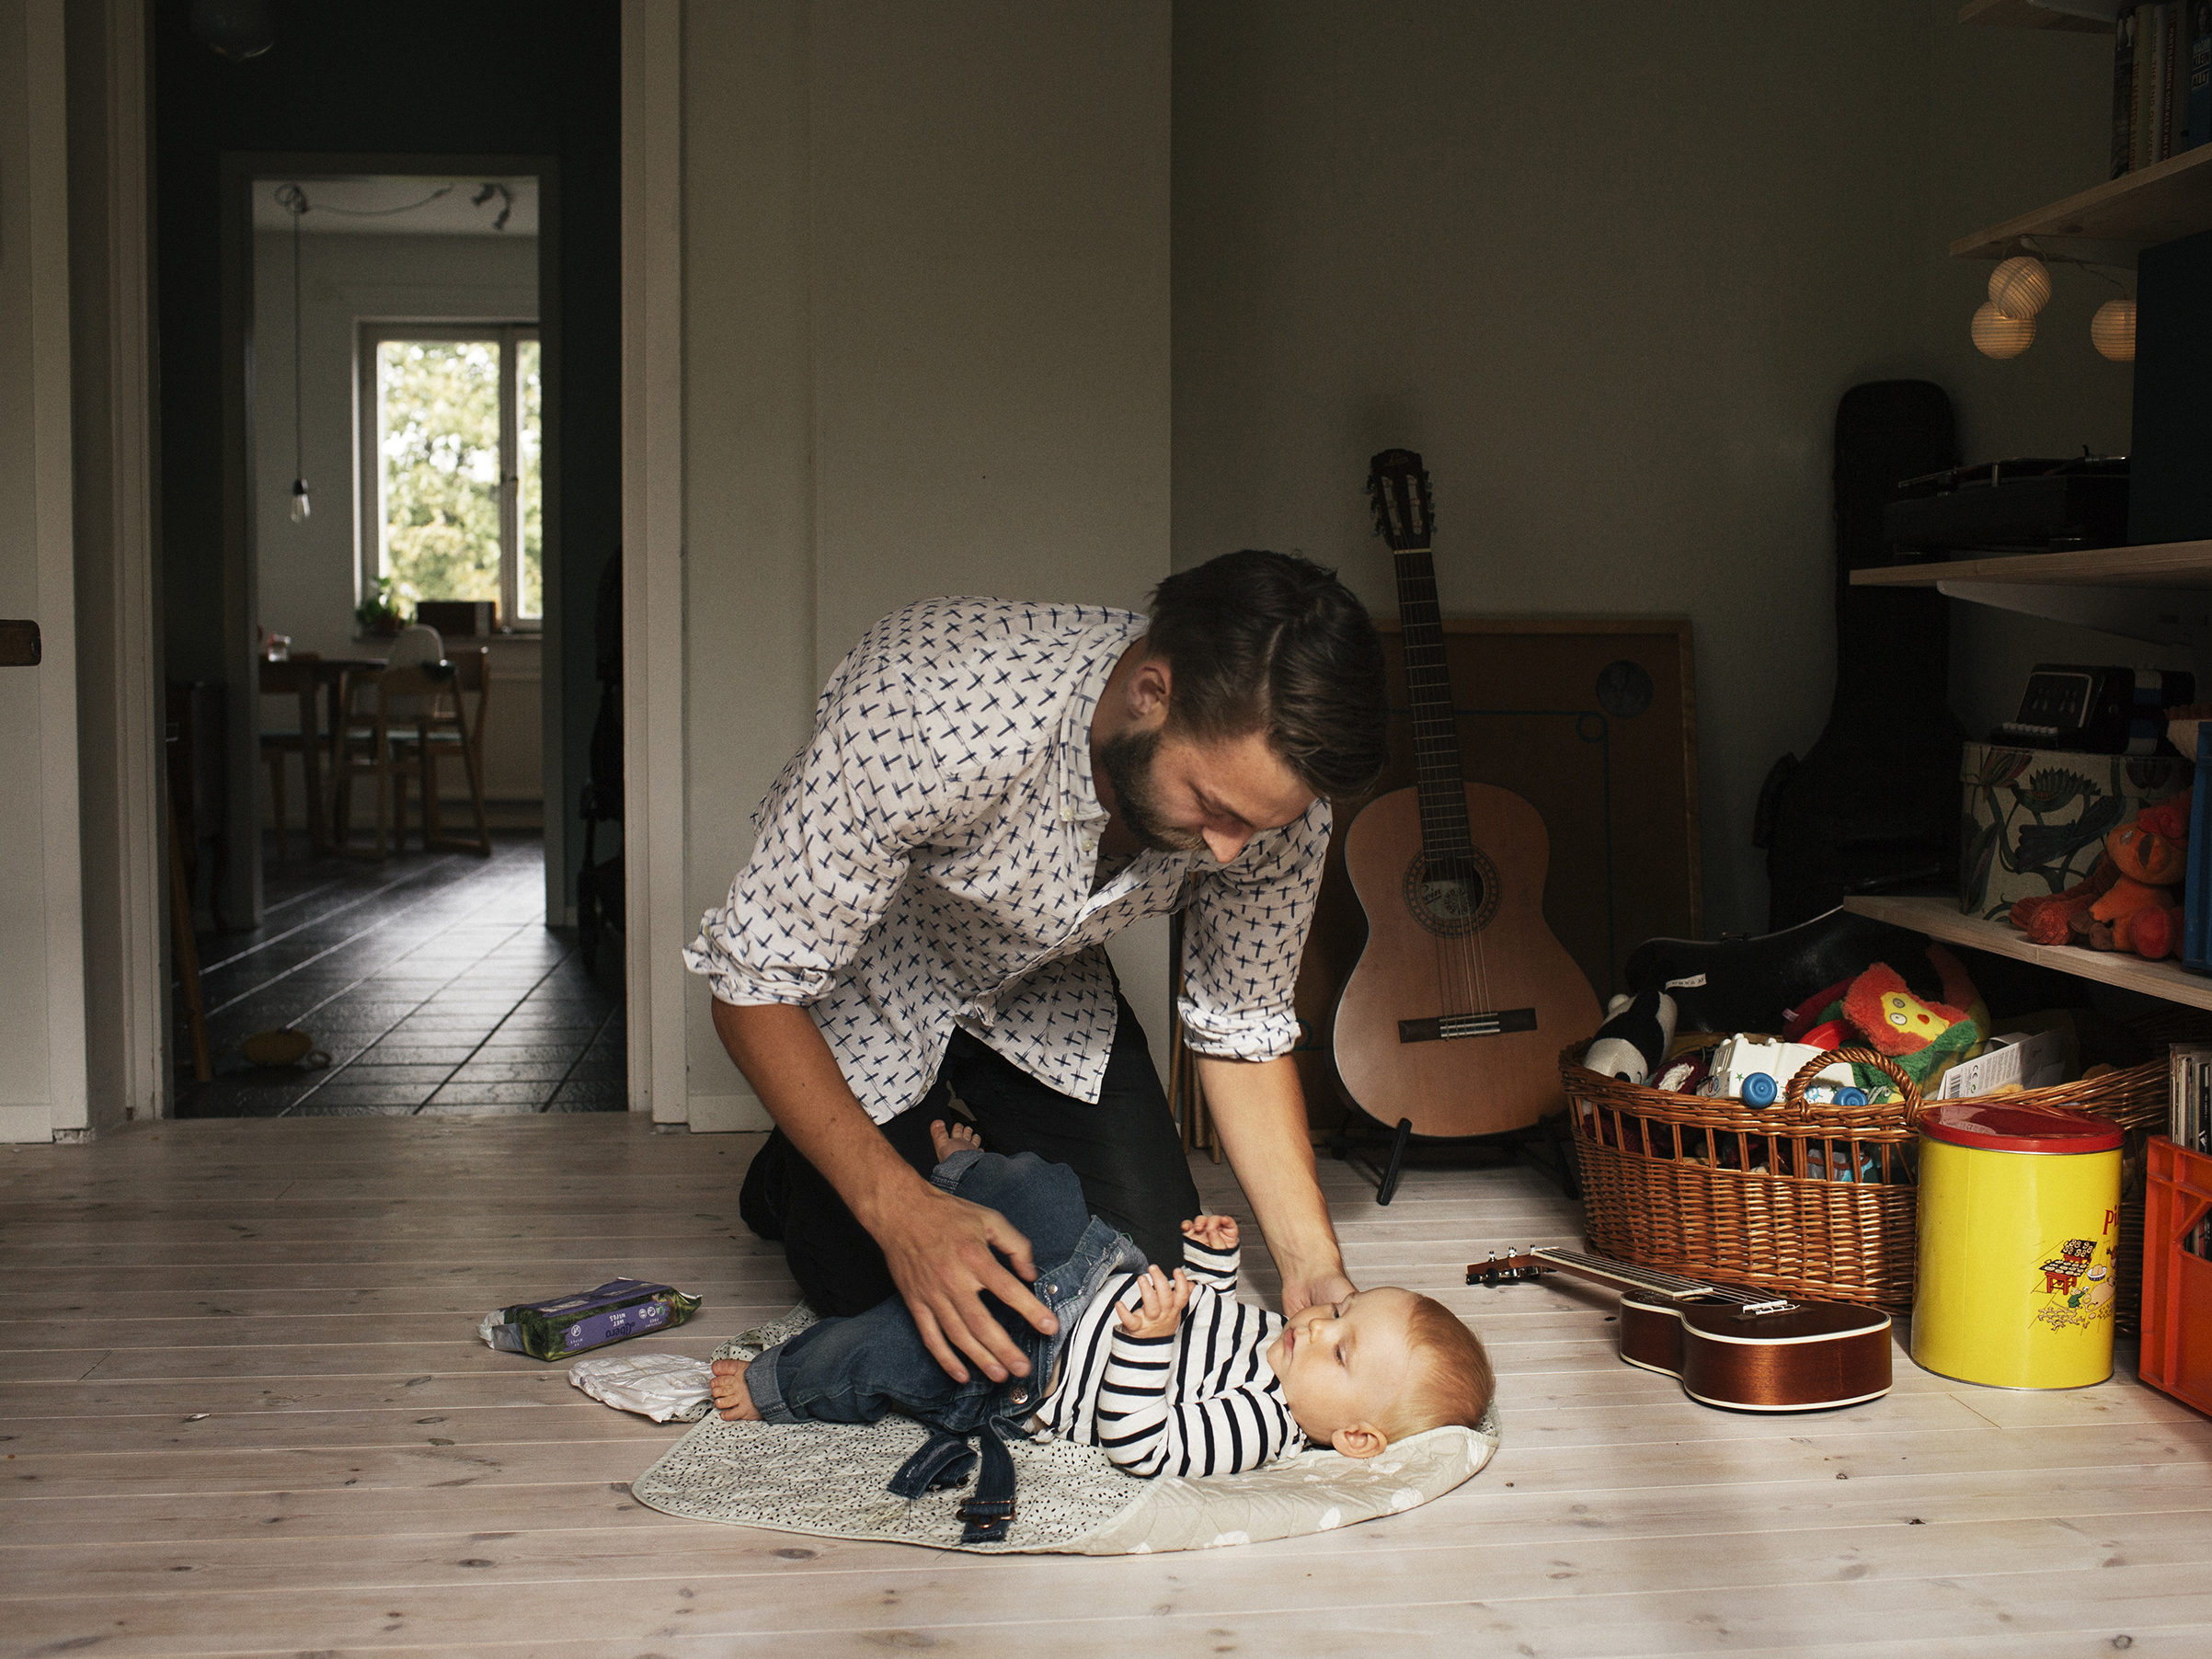 Martin Gunseus, 30, with 9-month-old son Pim, on Sept. 18 in Stockholm, two weeks into his scheduled eight-month paternity leave (Elin Berge—INSTITUTE for TIME)